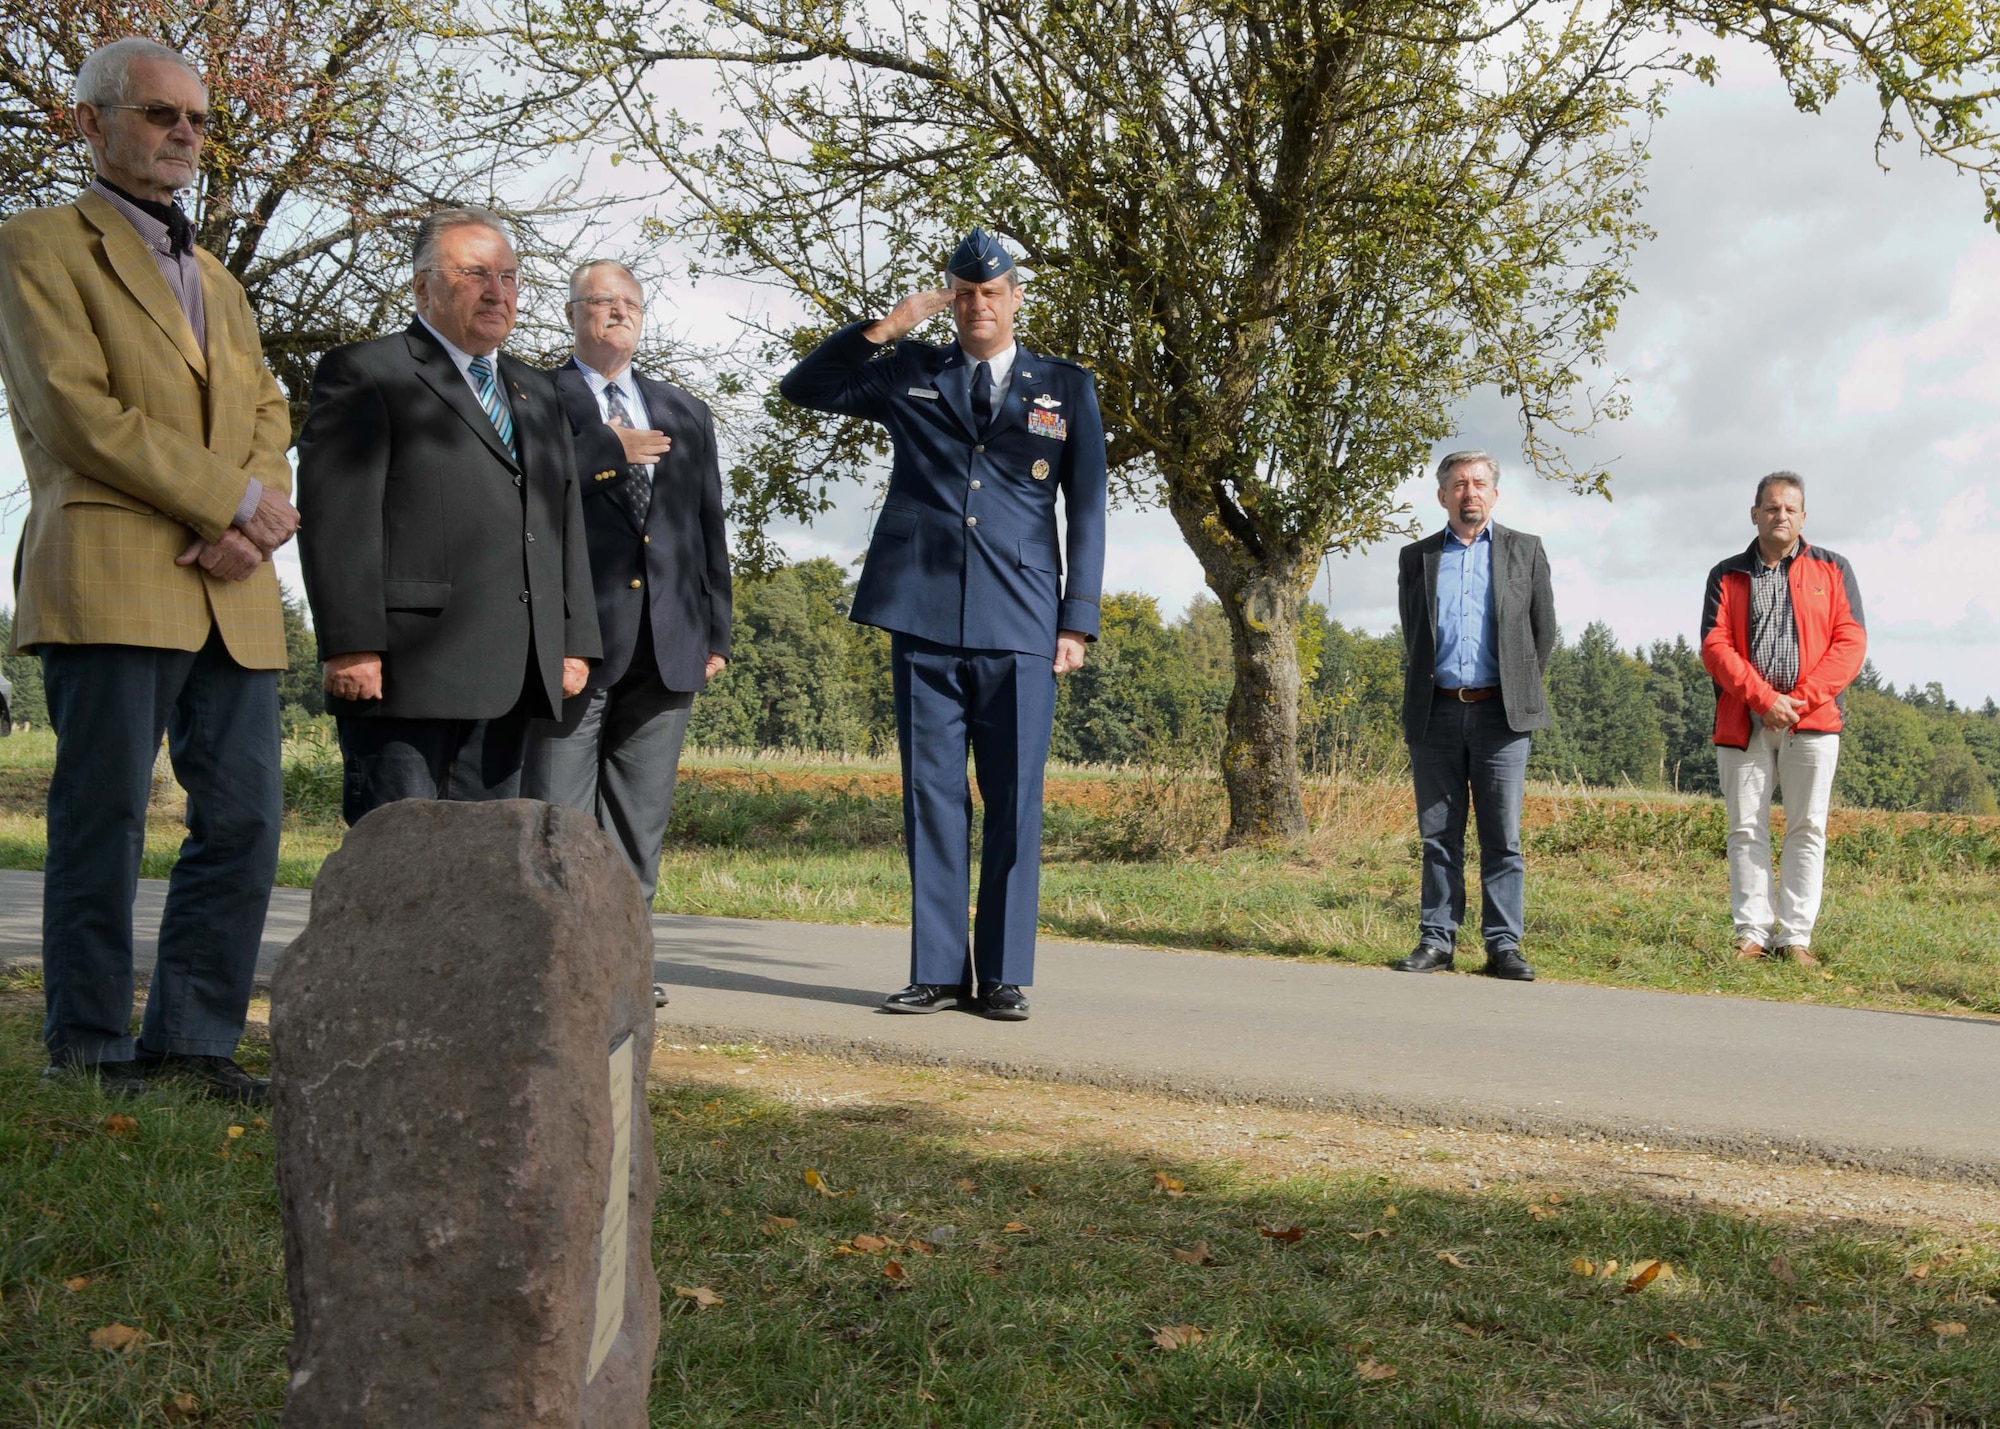 Col. Harry Benham, the U.S. Air Forces in Europe-Air Forces Africa operations and plans chief, salutes during the playing of taps during the revealing of a memorial stone for 2nd Lt. Priesley Cooper Jr. Sept. 25, 2015, in Dietingen, Germany. Cooper was conducting an escorting mission when his P-51D Mustang was shot down. The town of Dietingen buried him and 70 years later held a ceremony to honor him. (U.S. Air Force photo/Staff Sgt. Armando A. Schwier-Morales)